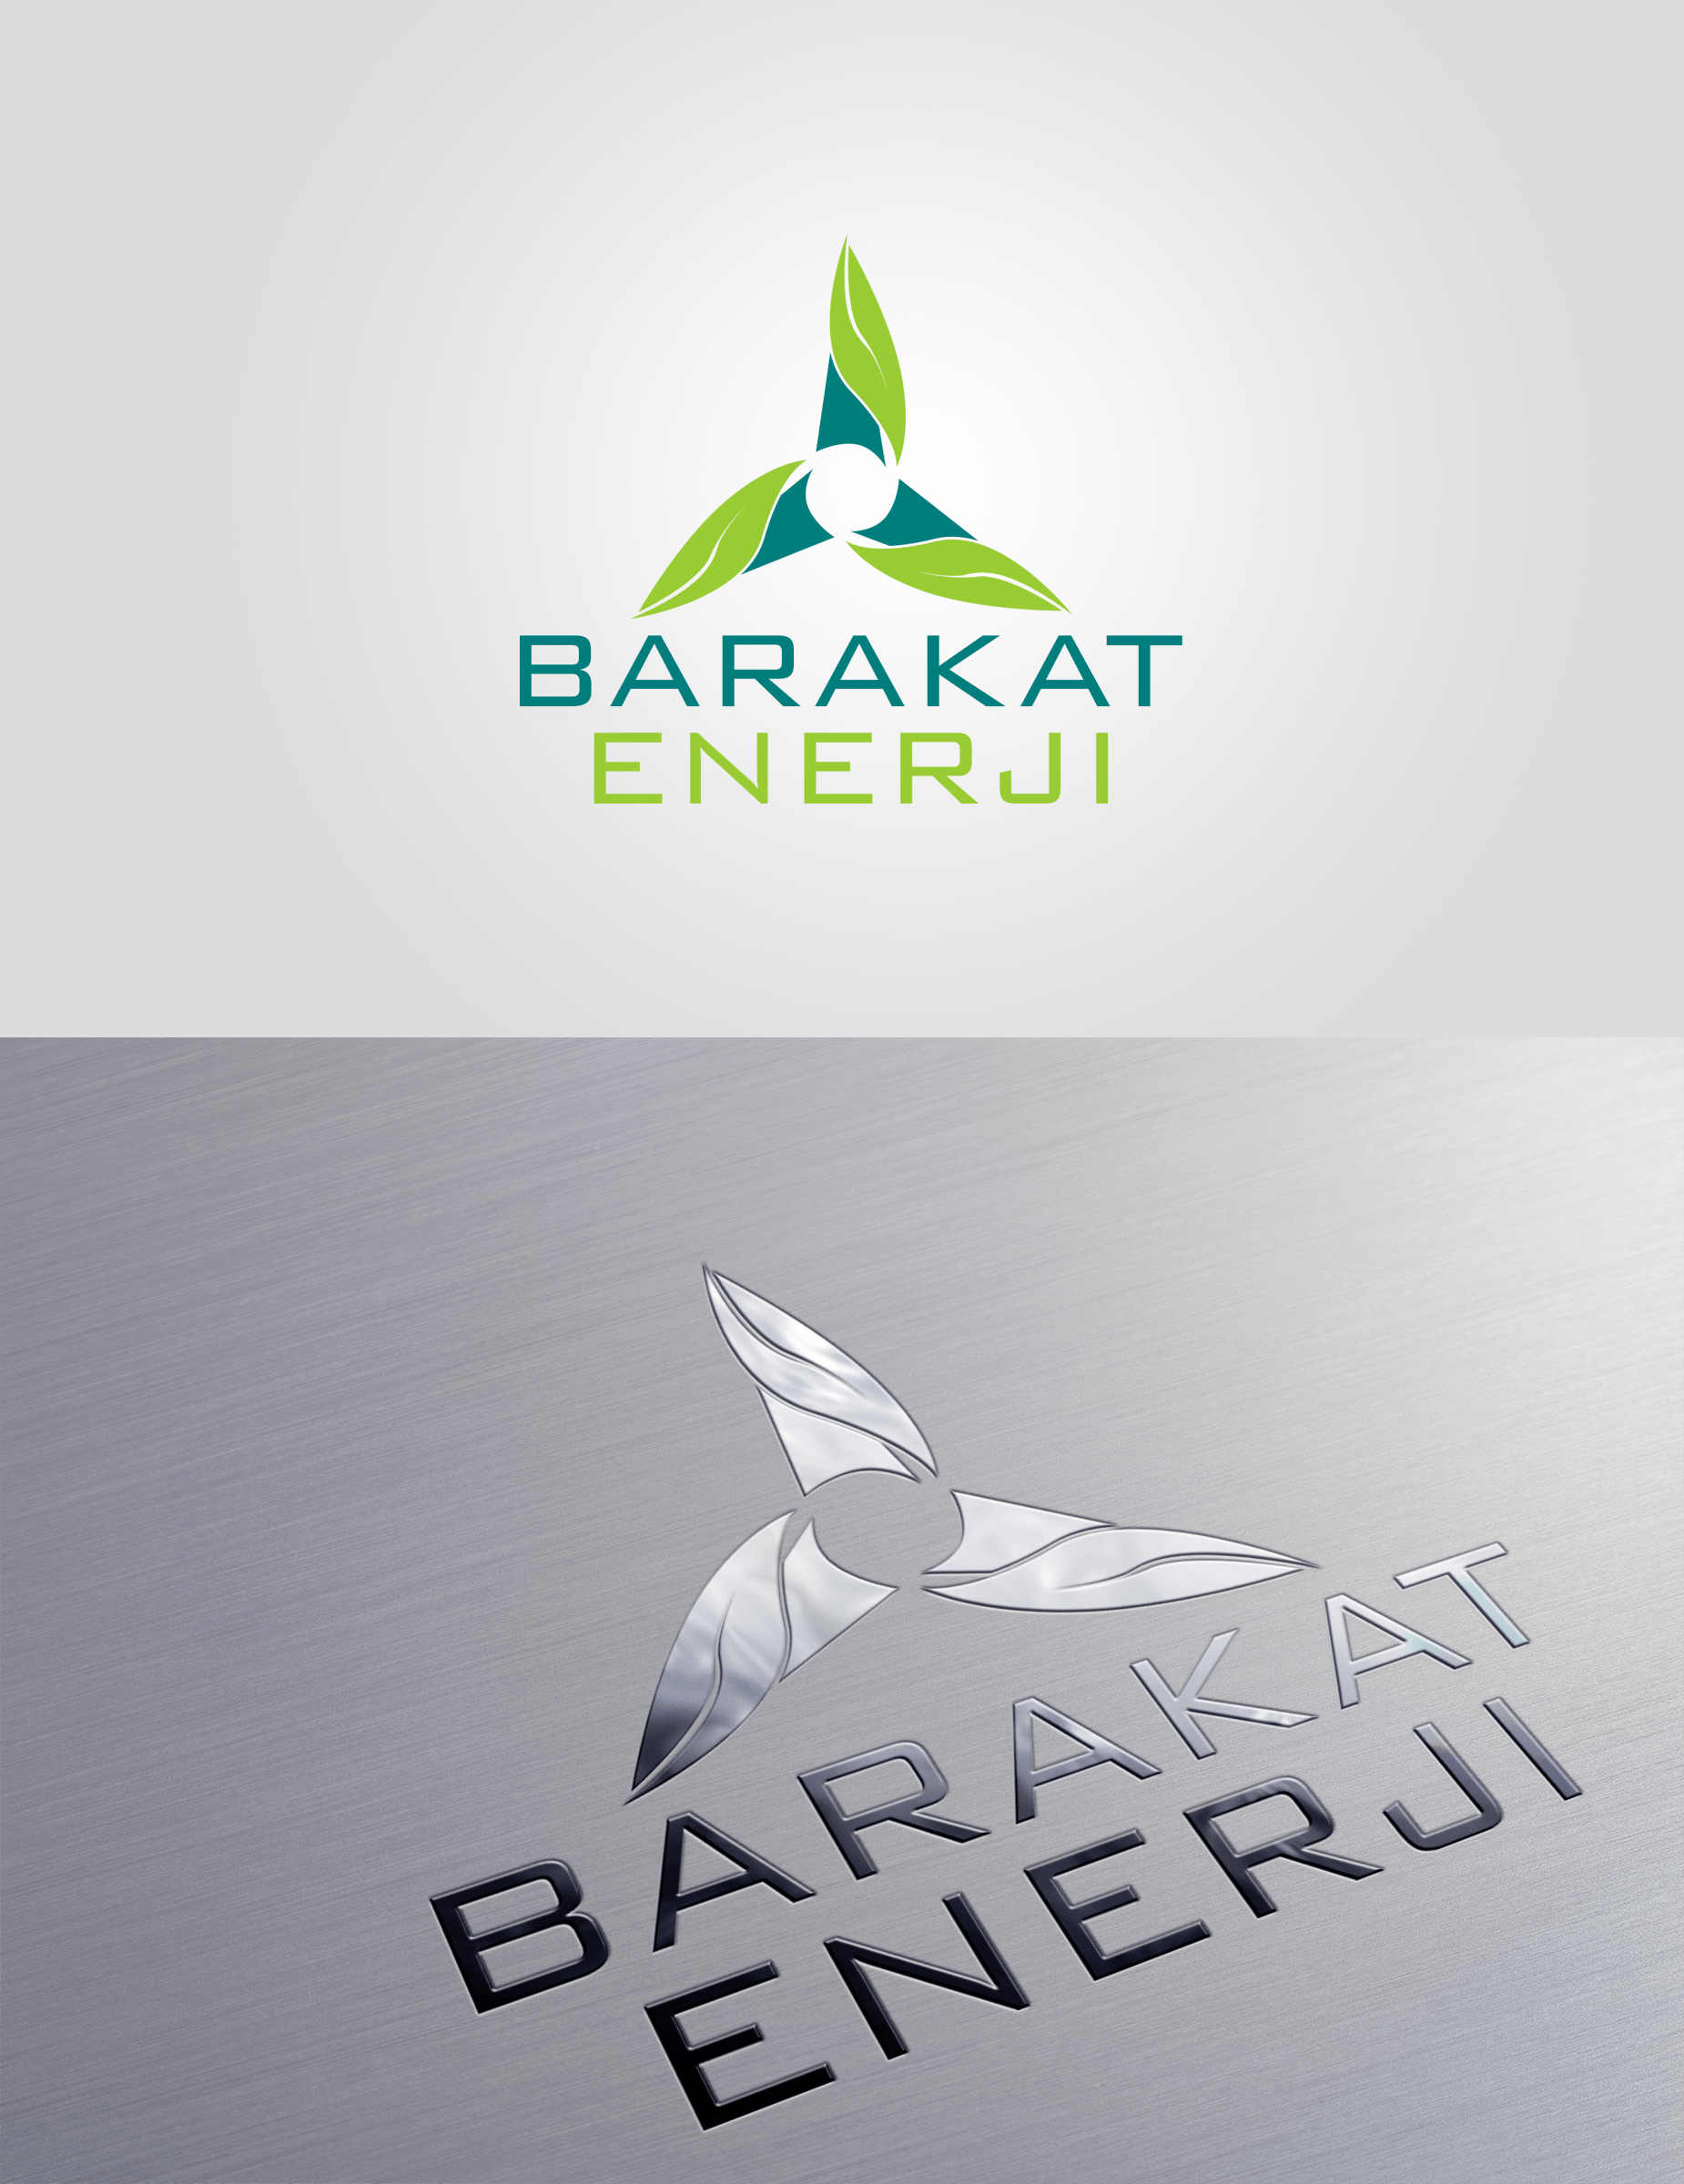 Energy Company Logo - Energy Company Logo Design | Order your Design today from our UK ...